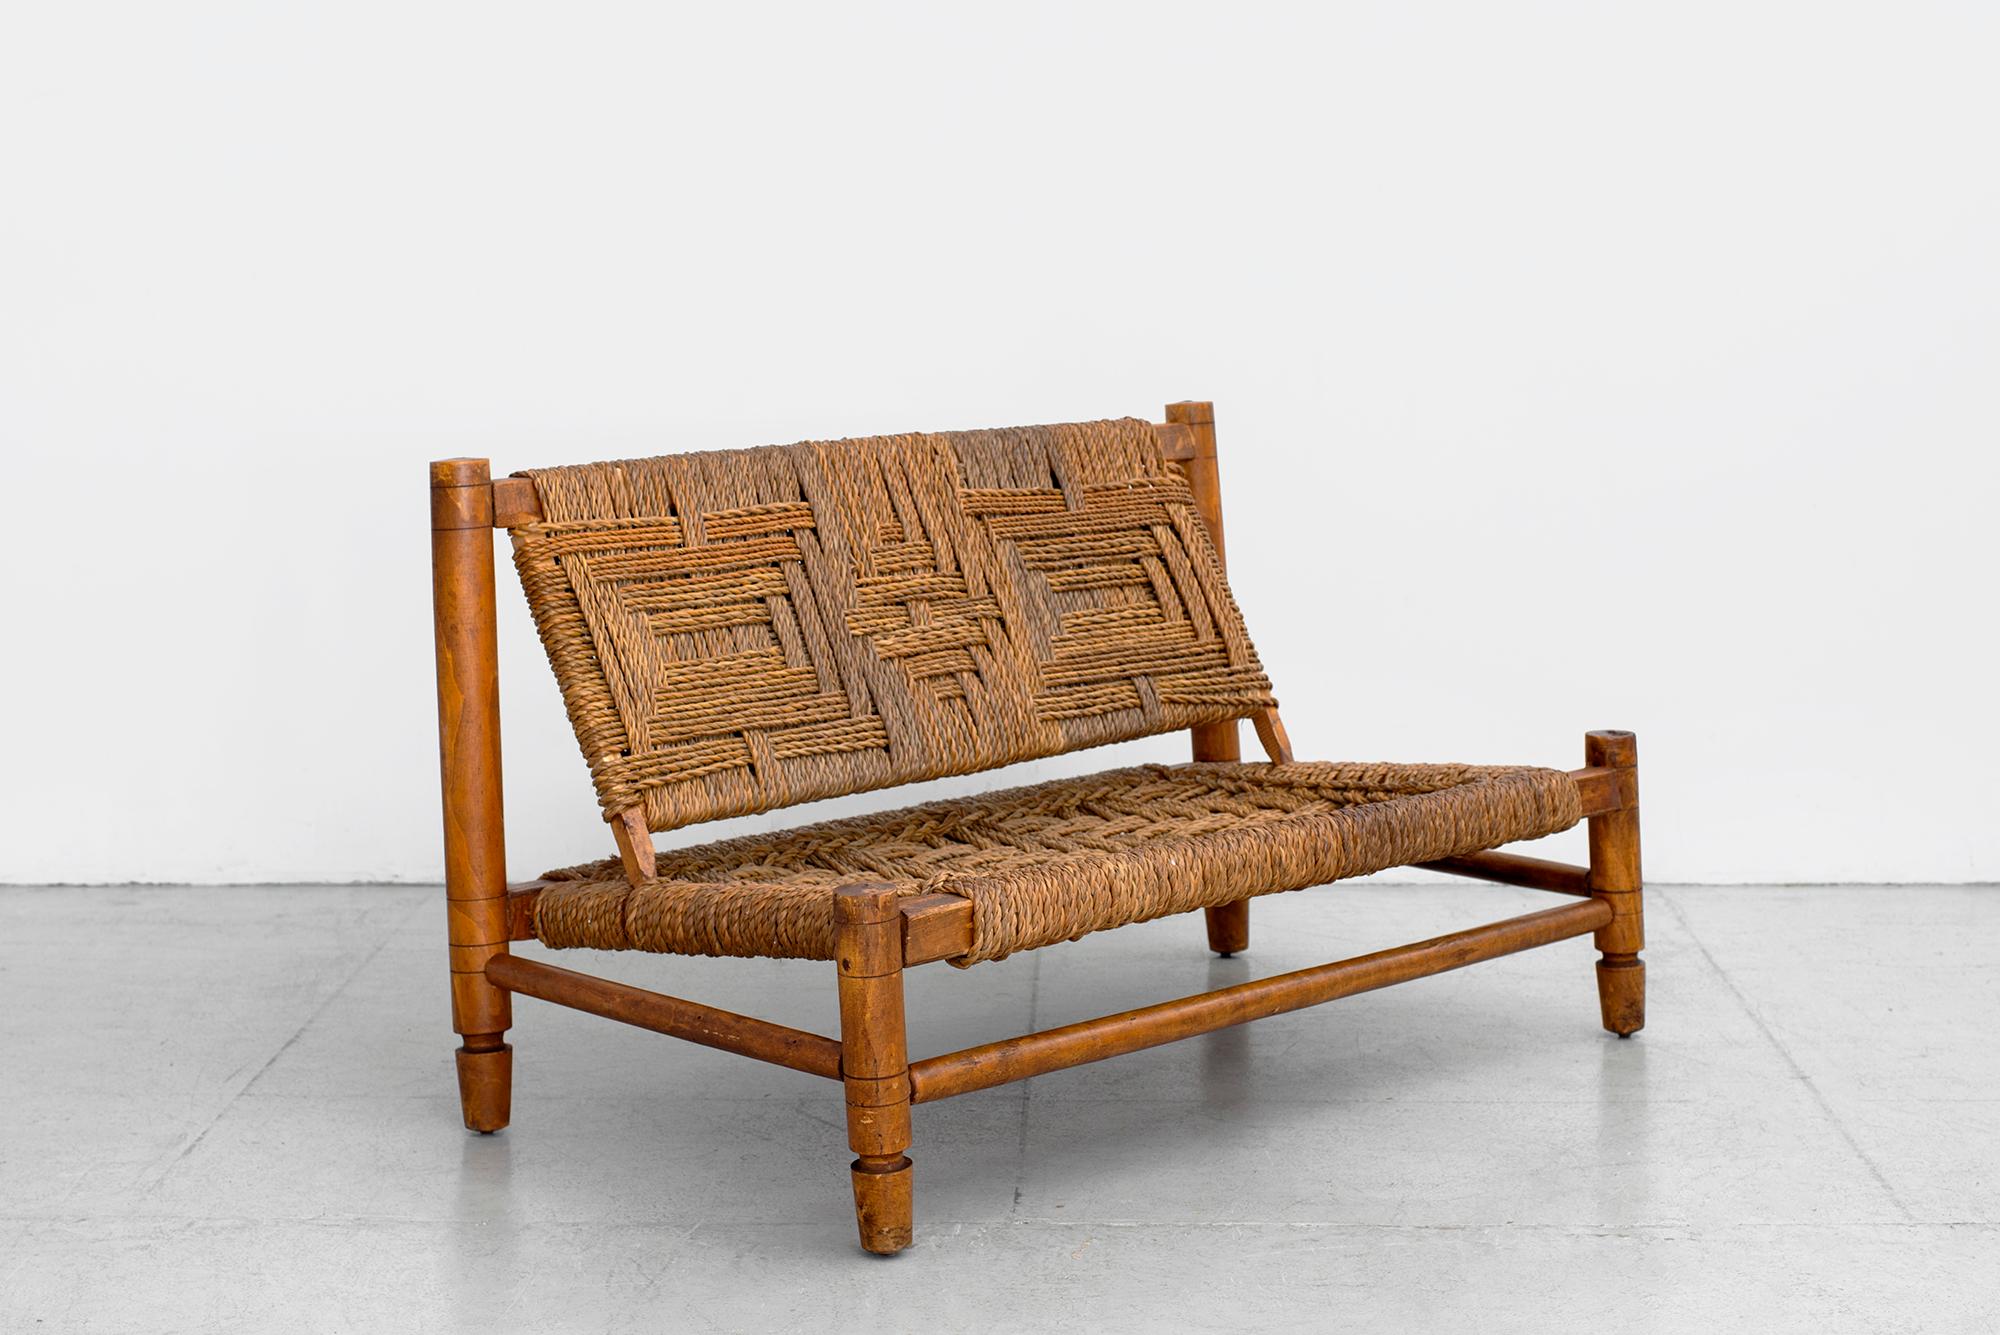 Audoux Minet bench with woven rope seat and back.
Signature carved wood legs and detailing.
Wonderful patina.



   